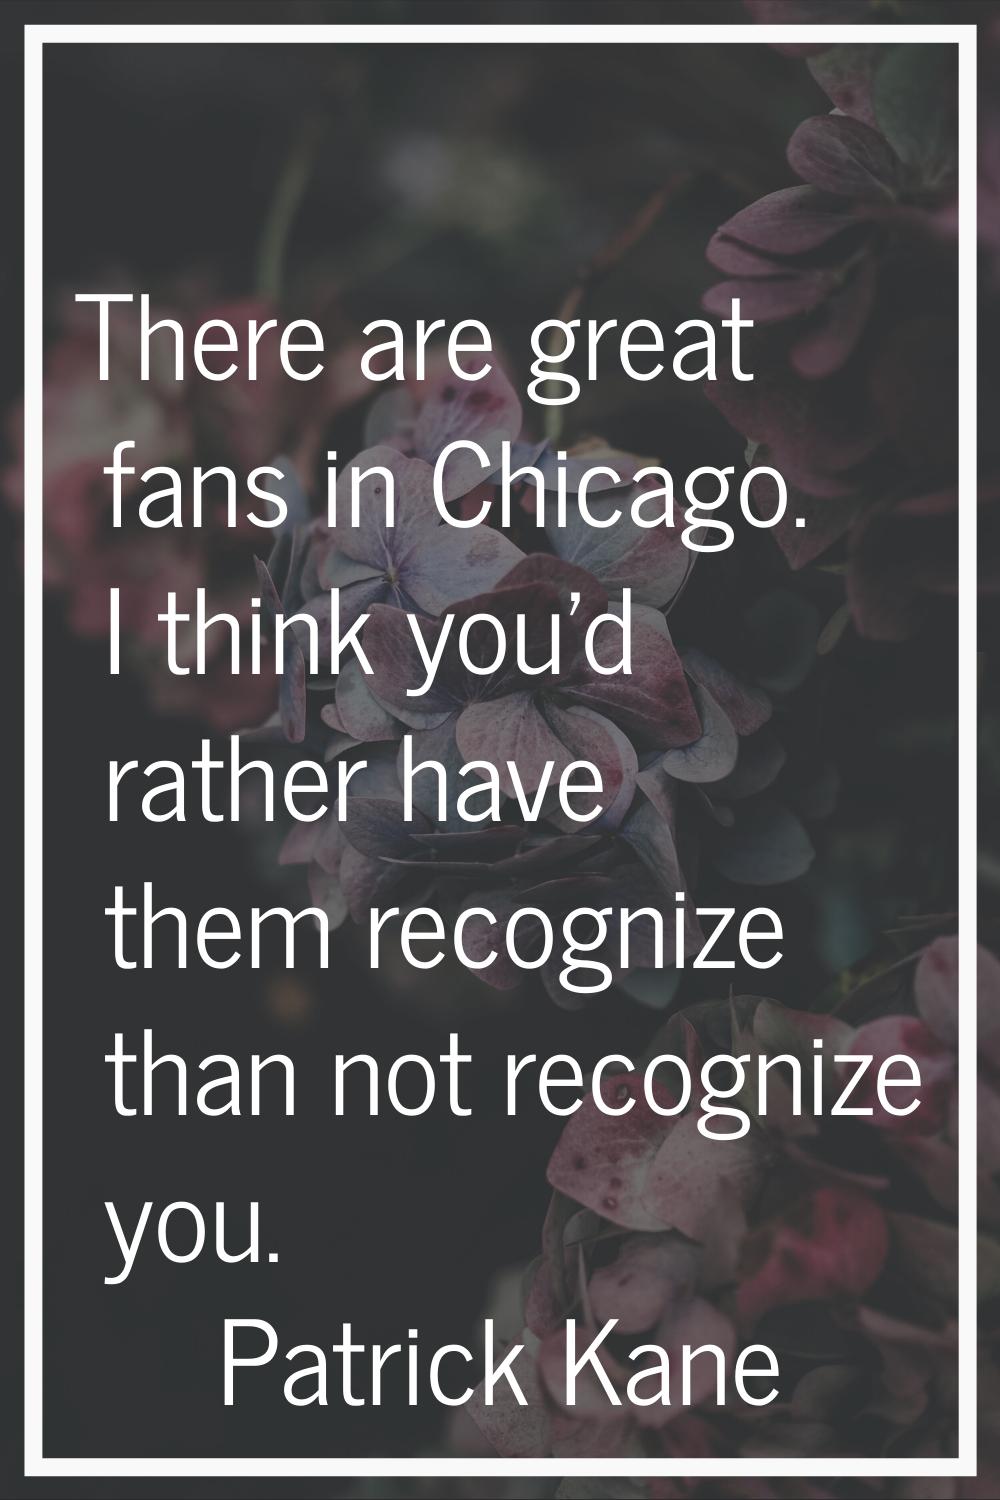 There are great fans in Chicago. I think you'd rather have them recognize than not recognize you.